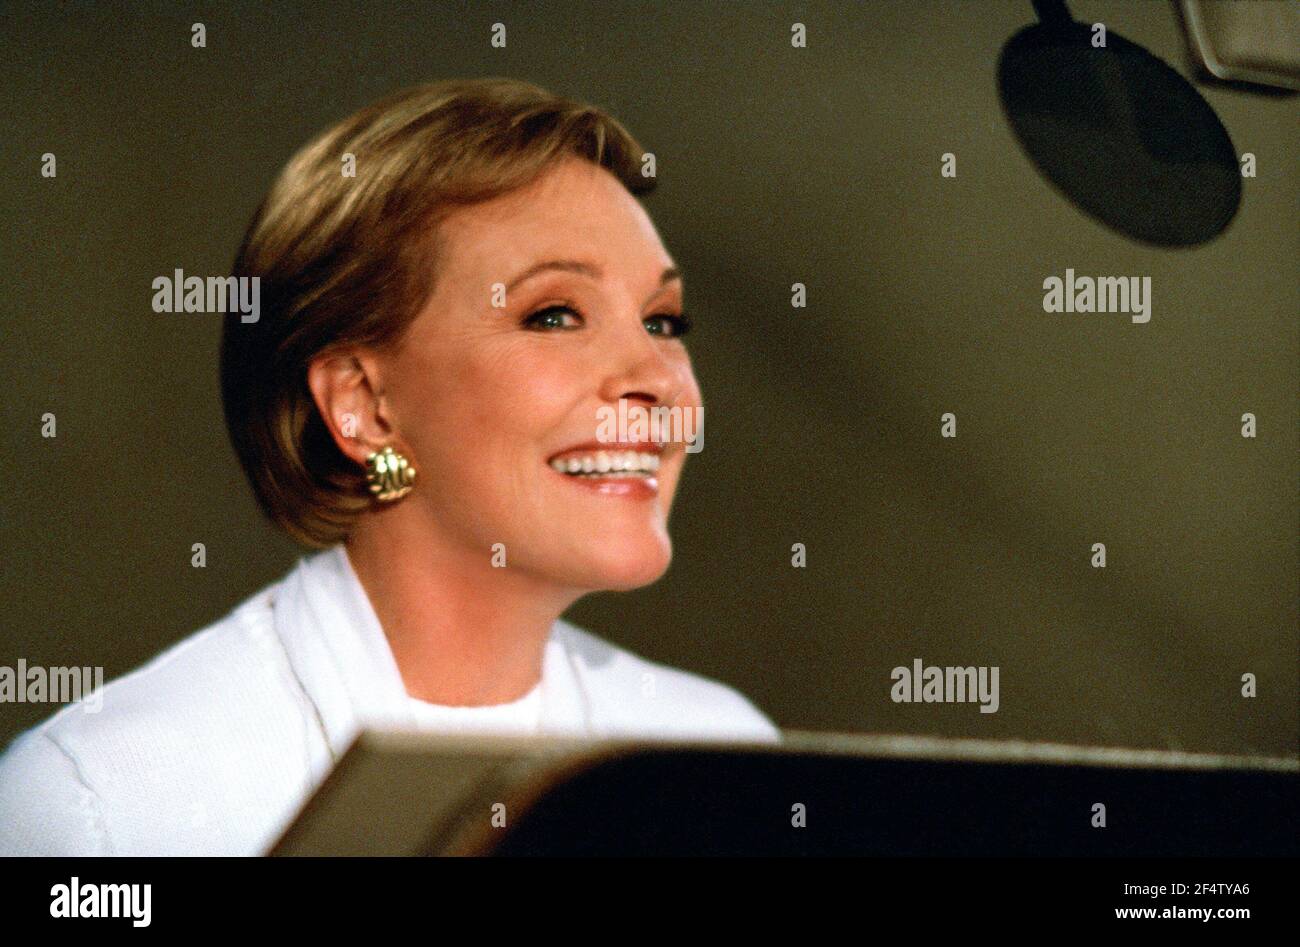 JULIE ANDREWS in SHREK 2 (2004), directed by ANDREW ADAMSON, KELLY ASBURY and CONRAD VERNON. Credit: DREAMWORKS PICTURES / JONES, KEVIN / Album Stock Photo